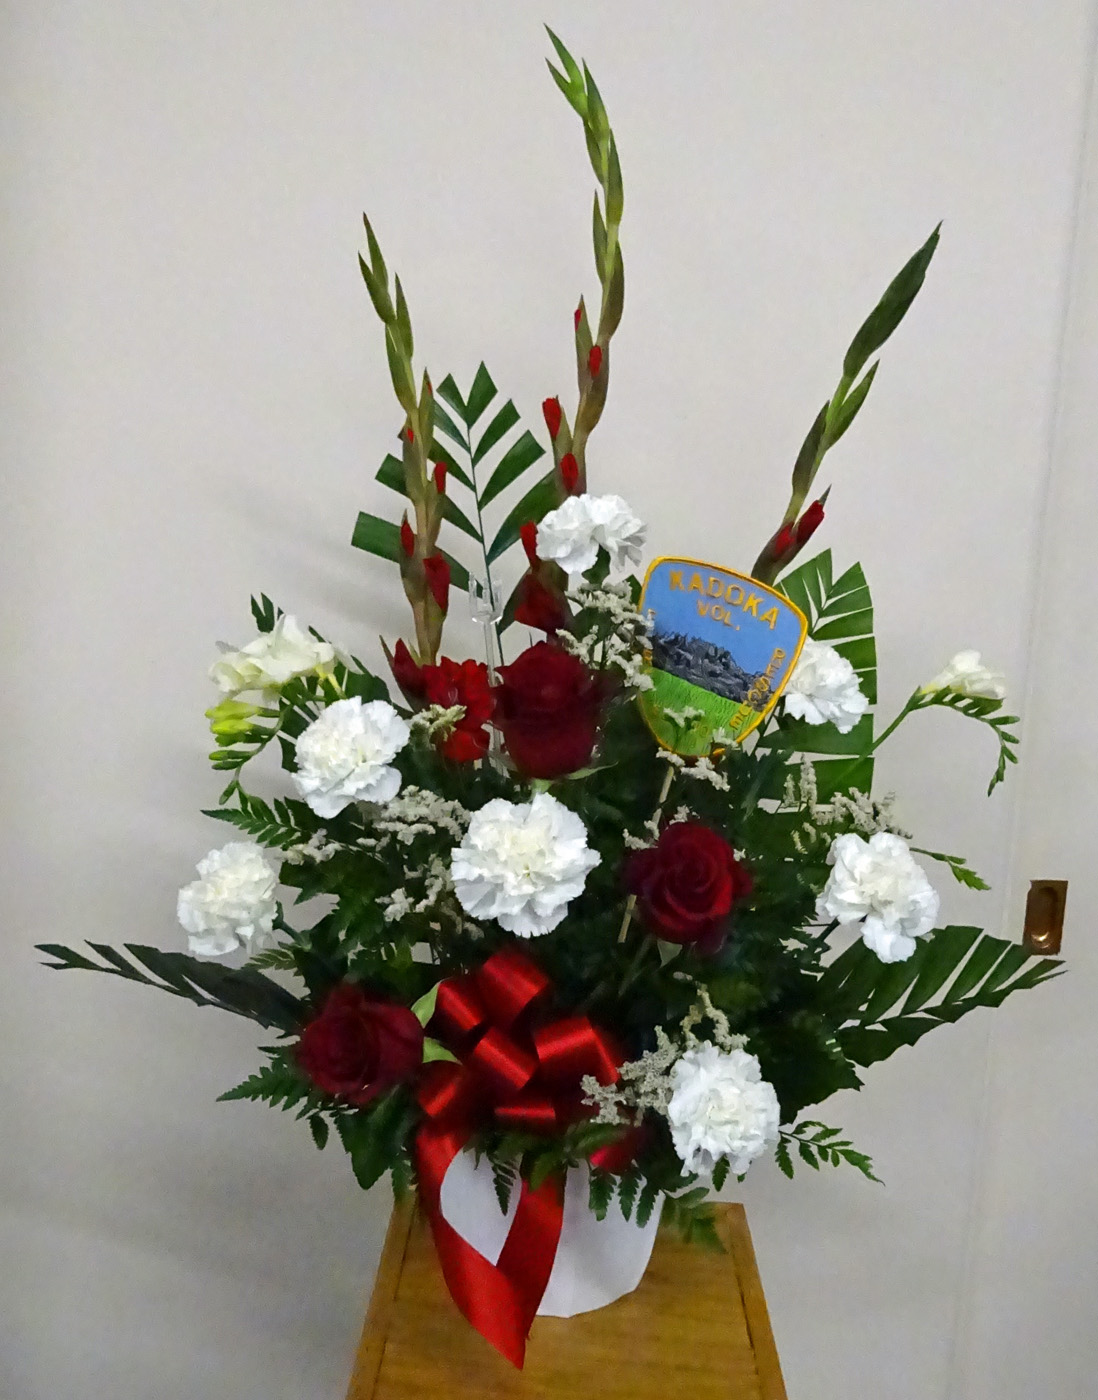 Flowers from KVFD